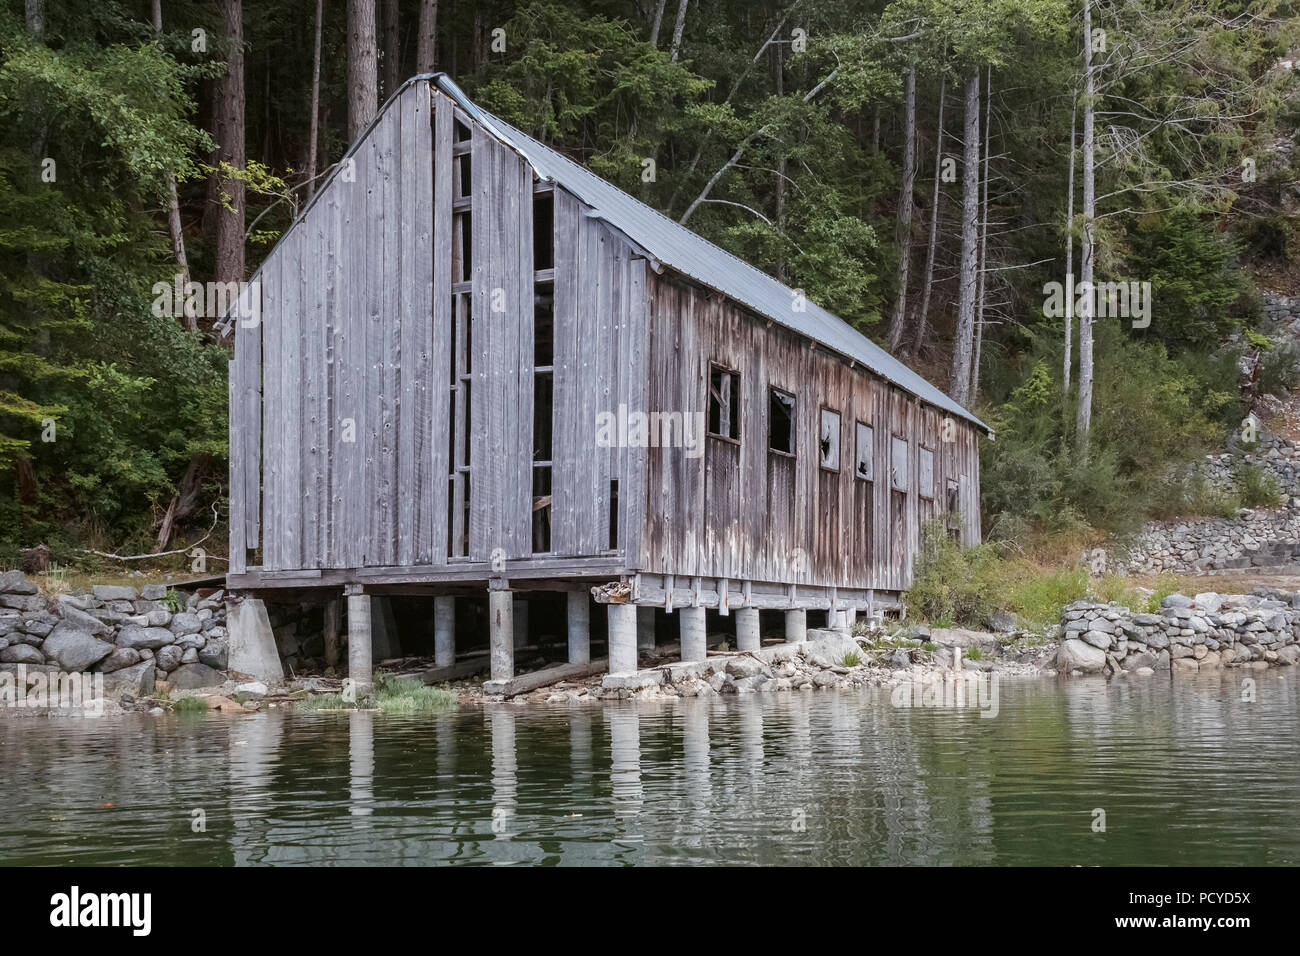 In need of repair, an old weathered wooden boat shed extends out from shore, standing on concrete supports that will be partly submerged at high tide. Stock Photo